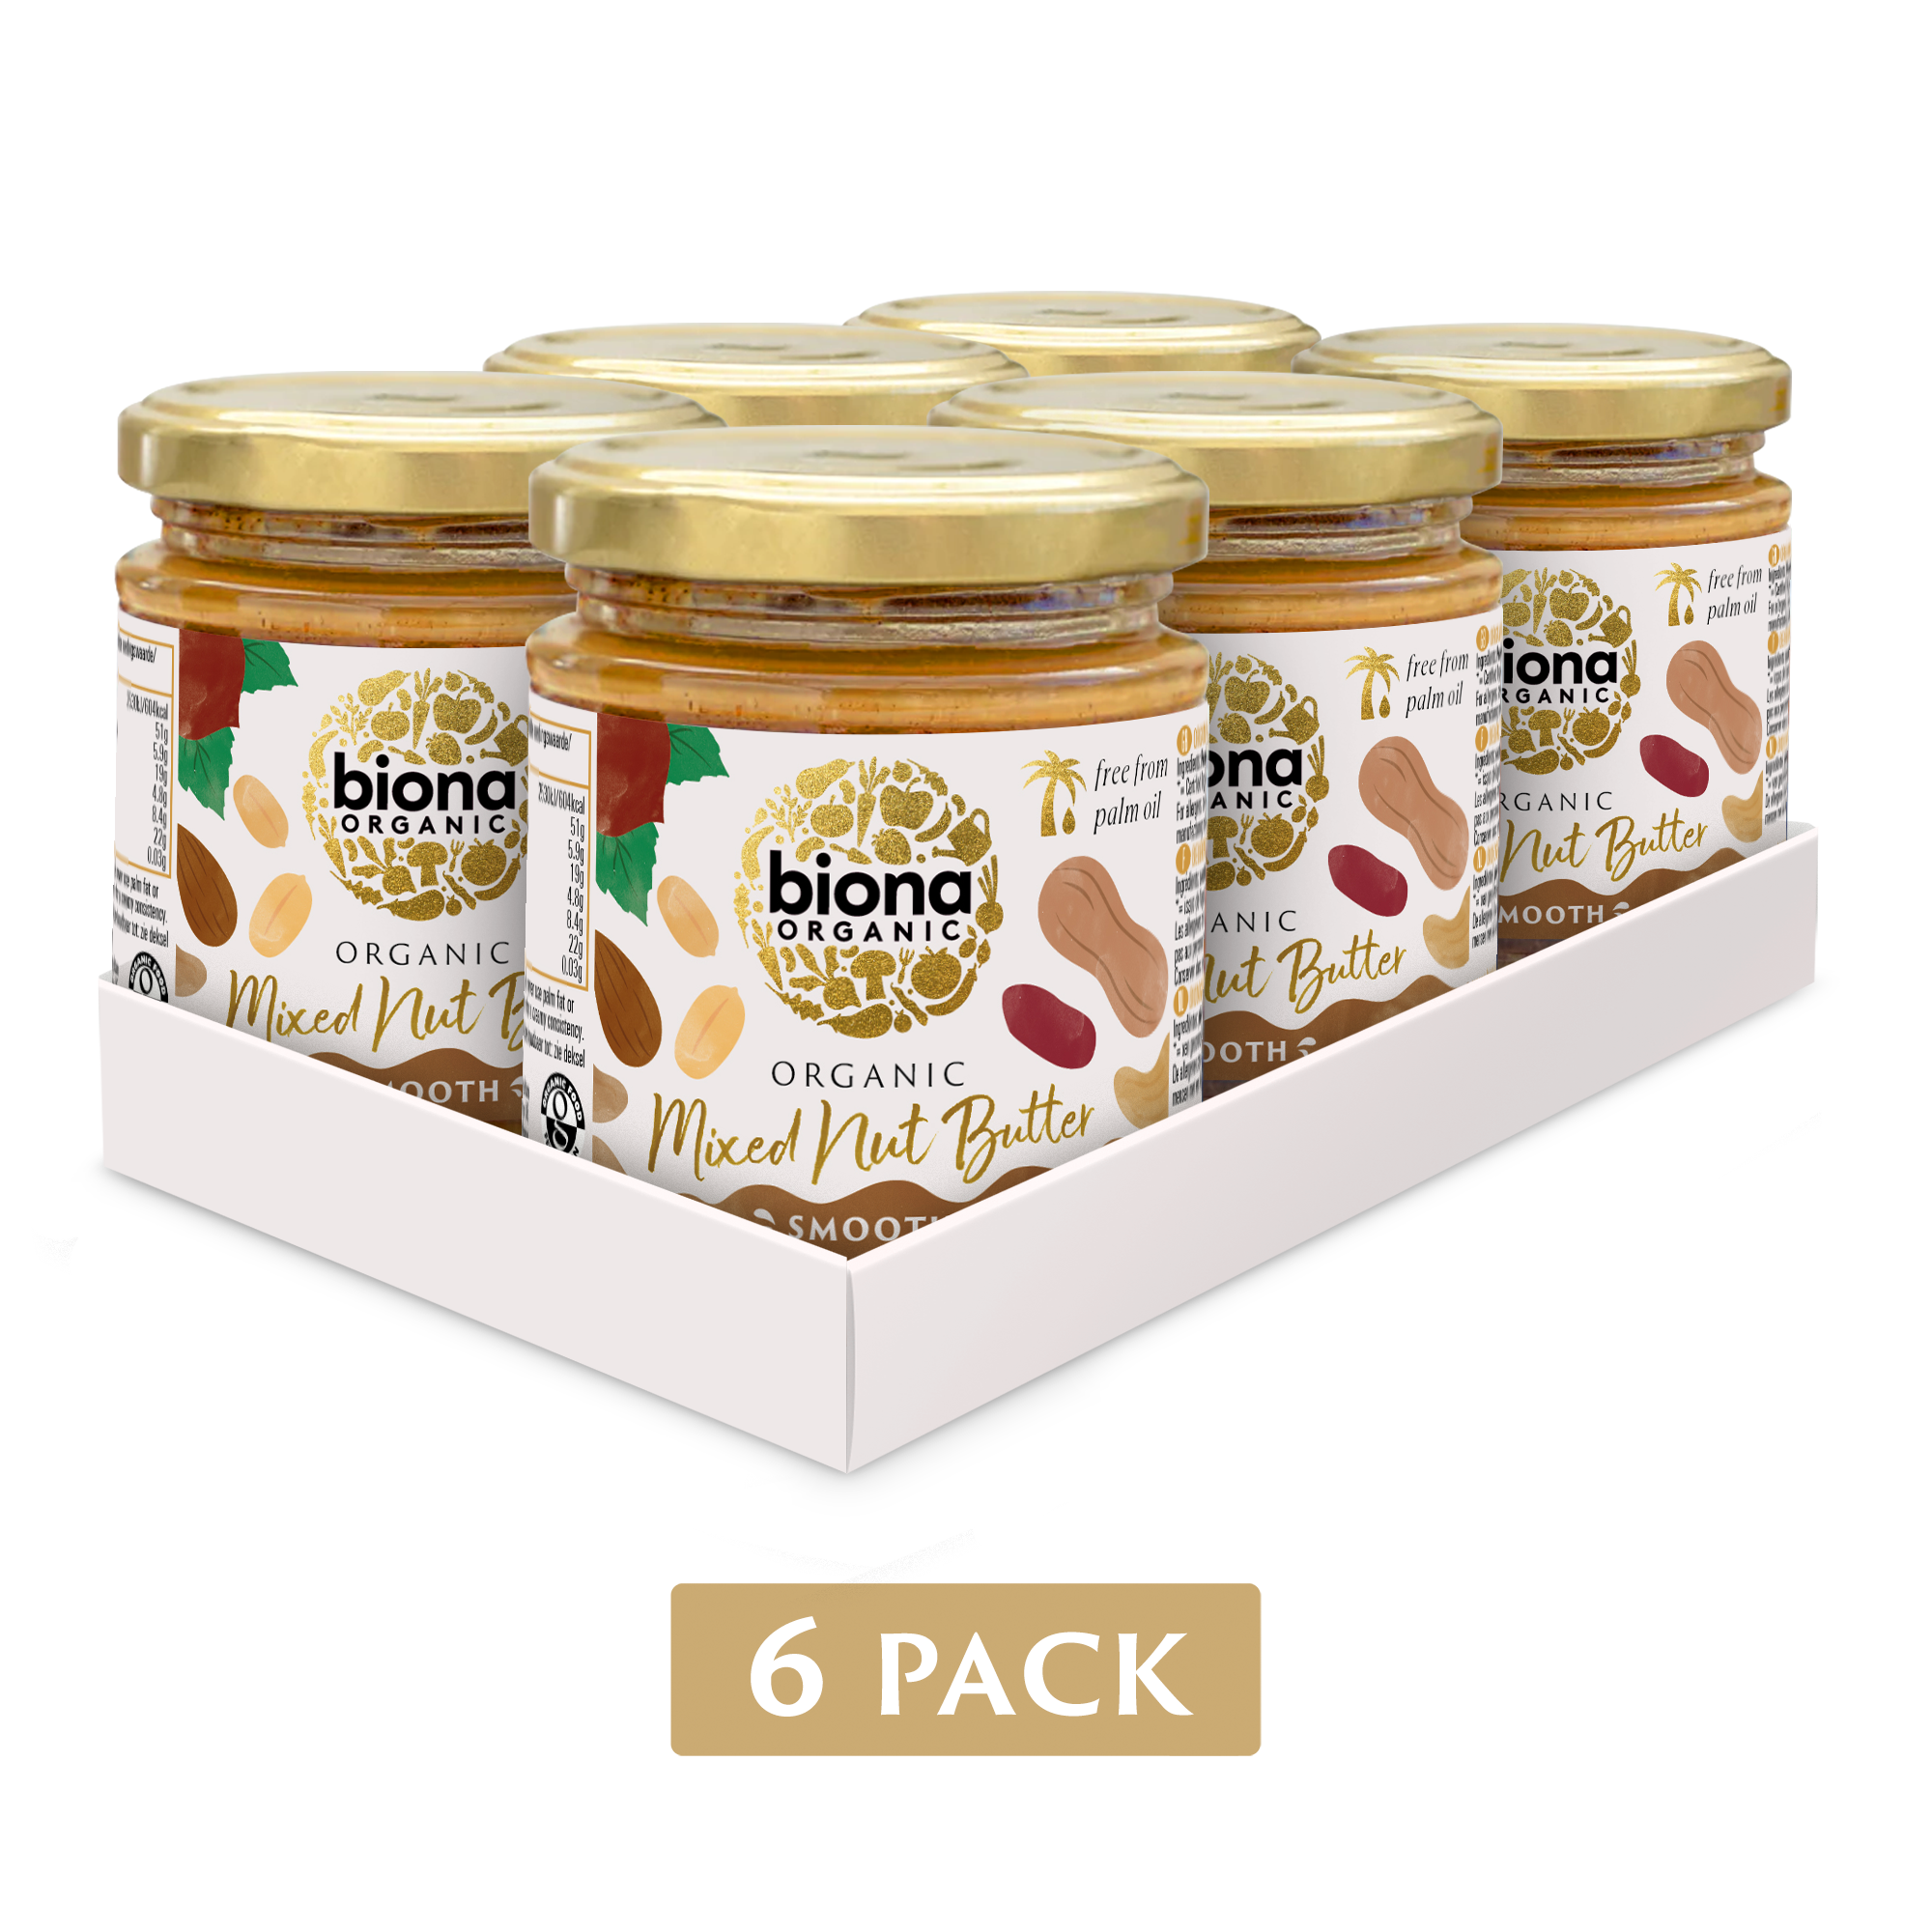 MIXED NUT BUTTER - 6 PACK